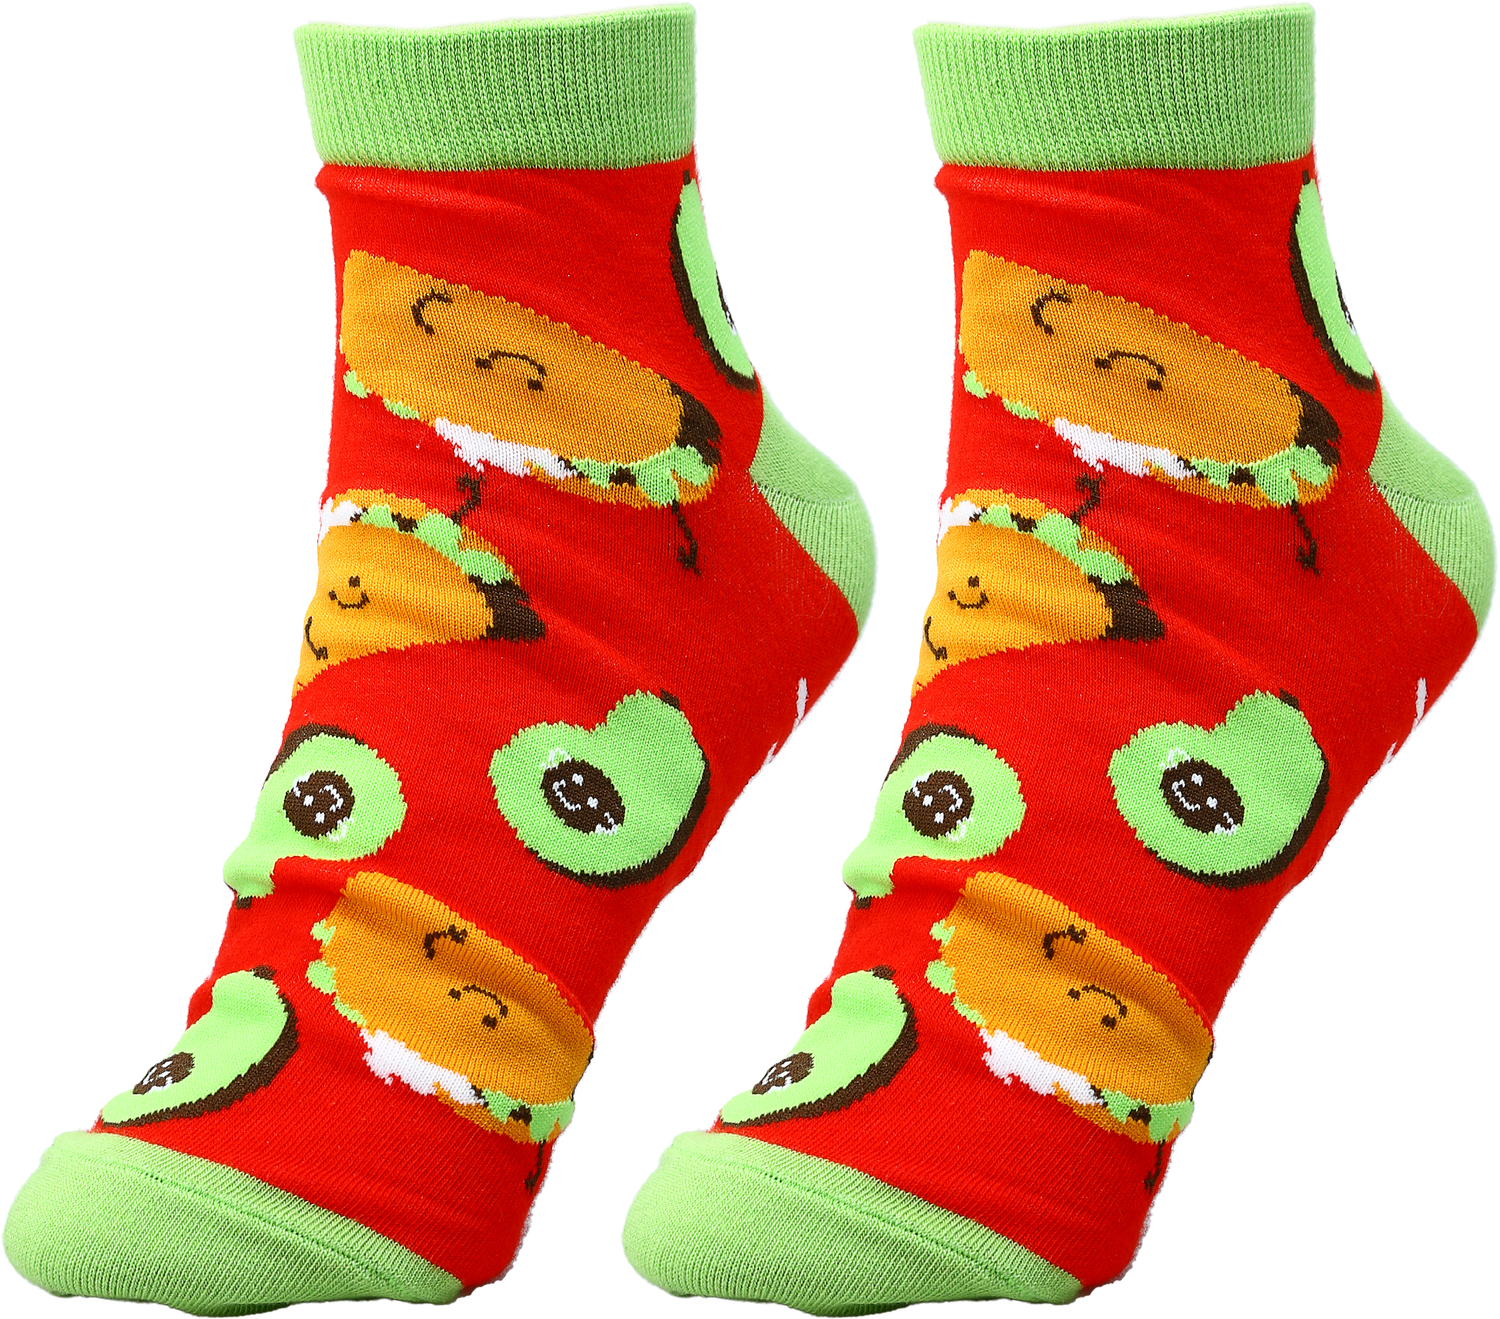 Taco and Avocado by Late Night Snacks - Taco and Avocado - Cotton Blend Ankle Socks